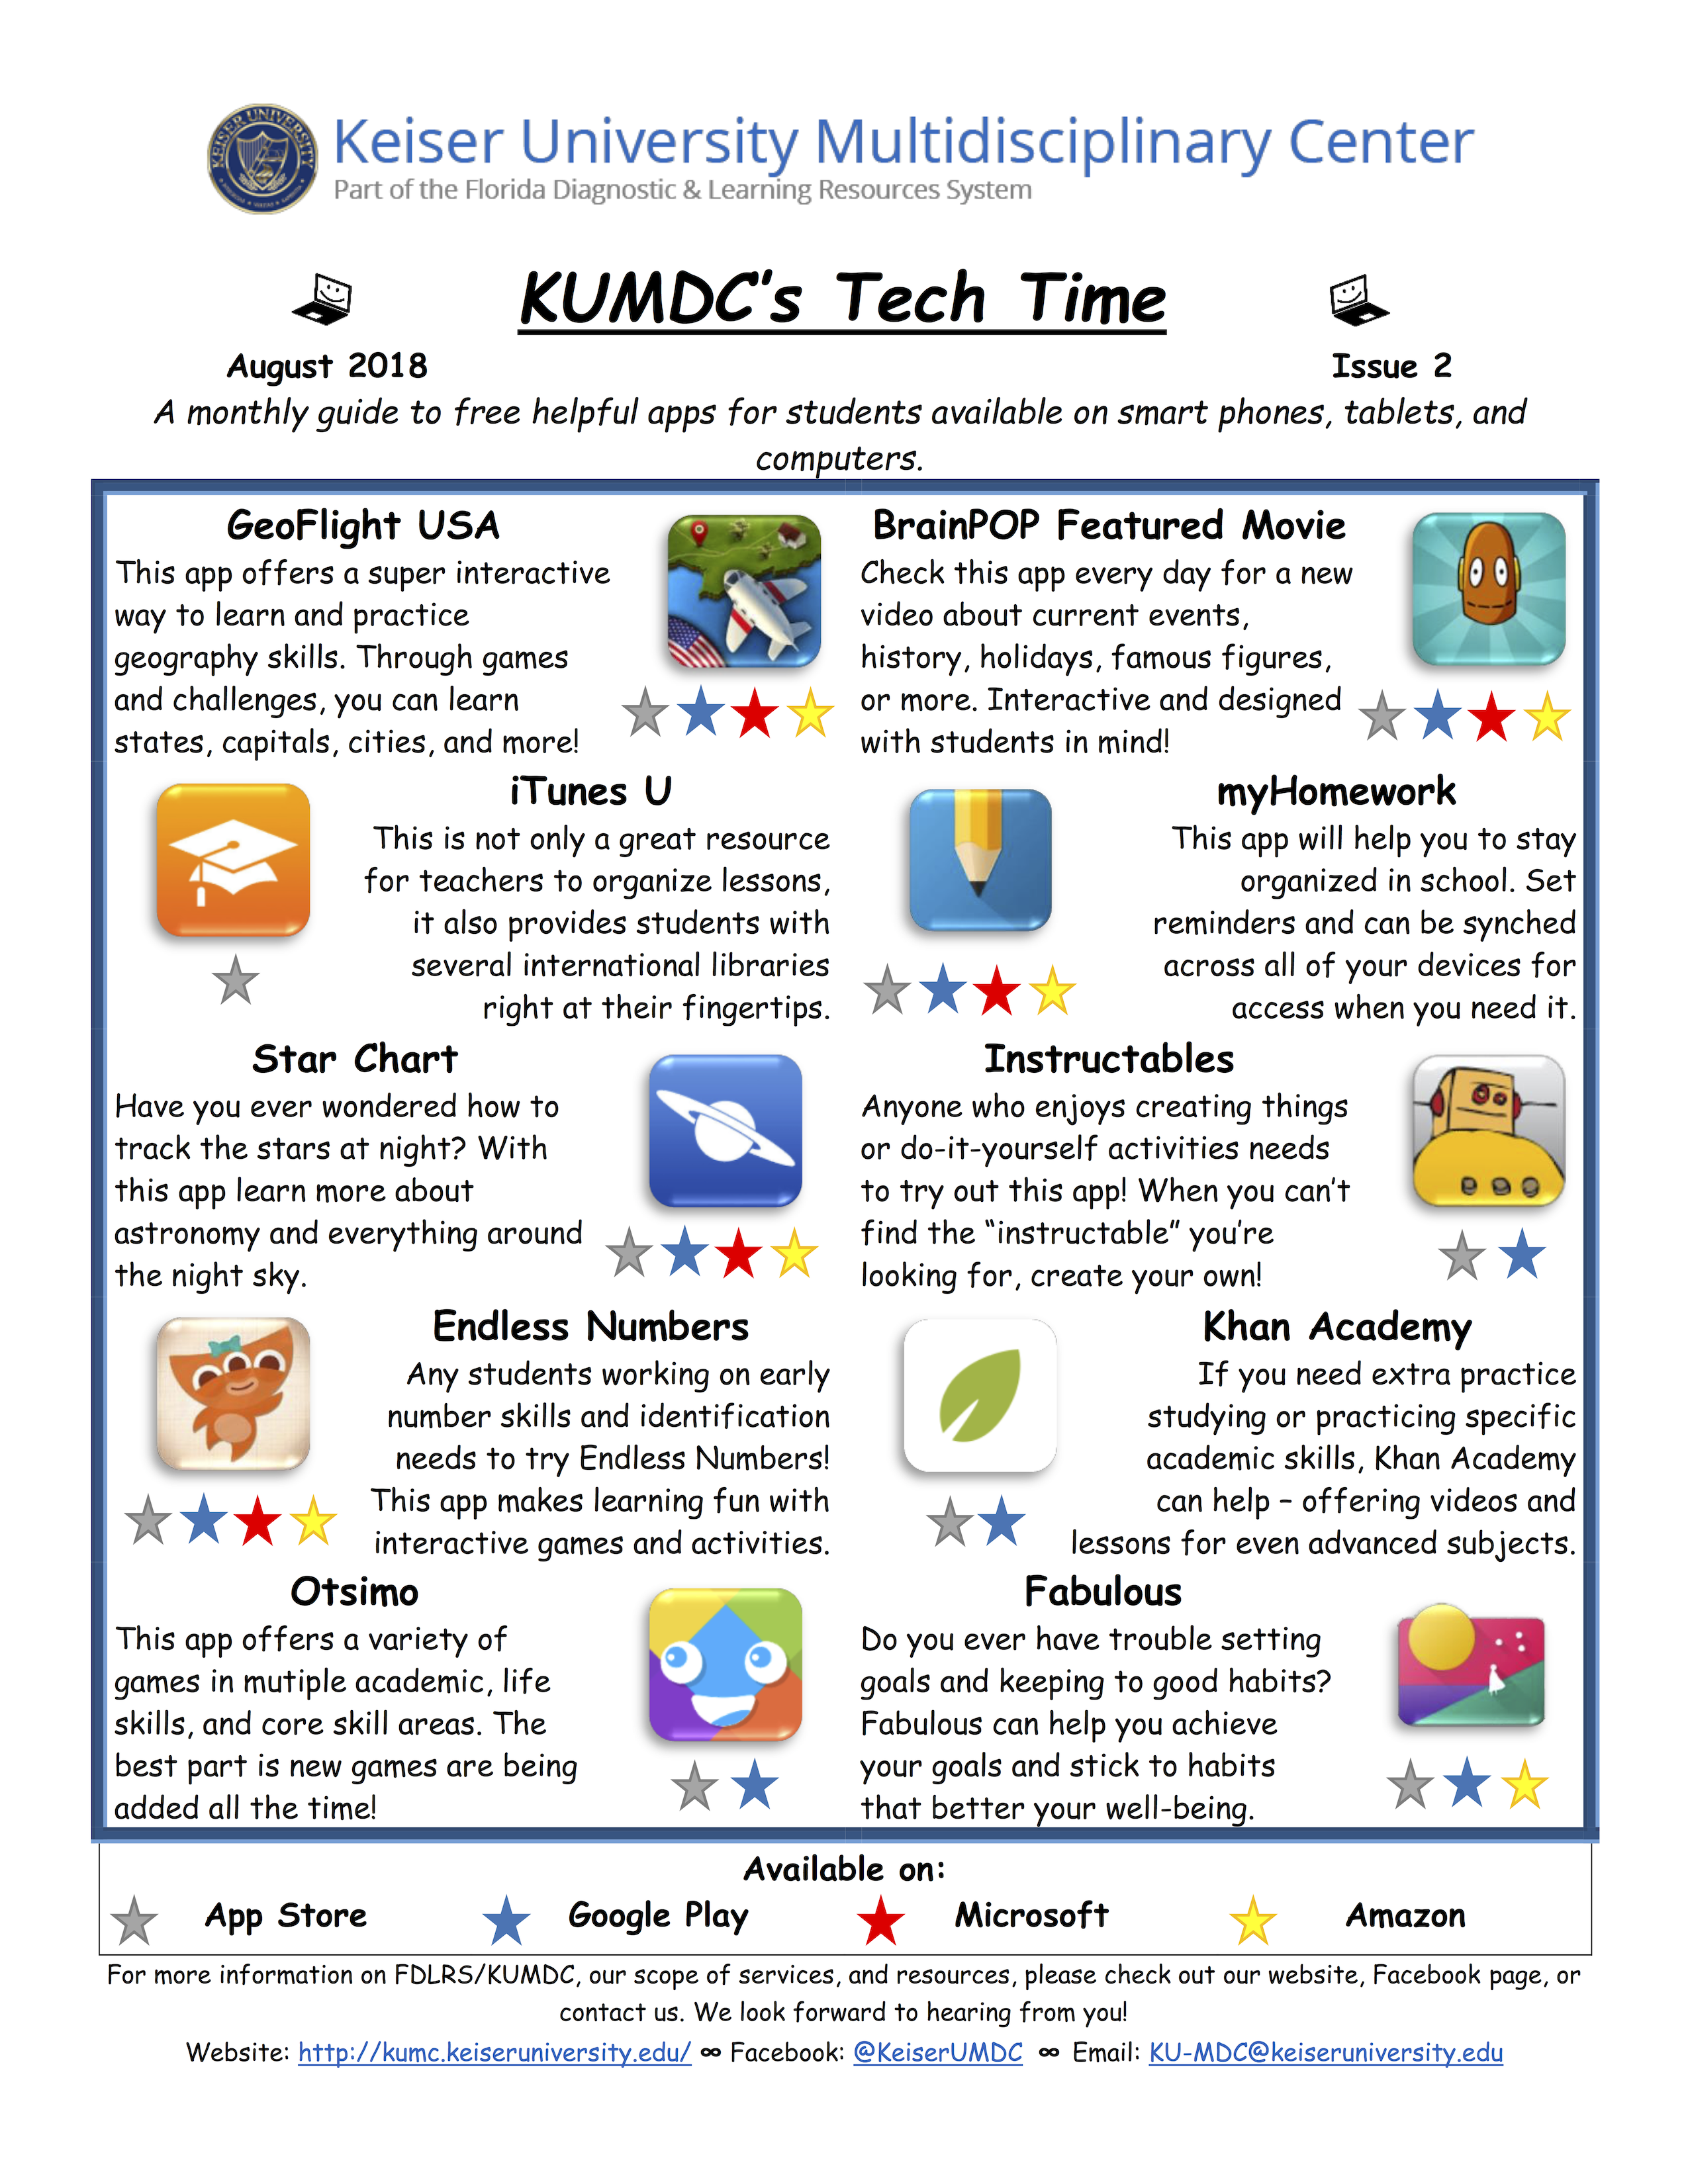 image with clickable link to August 2018 TechTime Newsletter